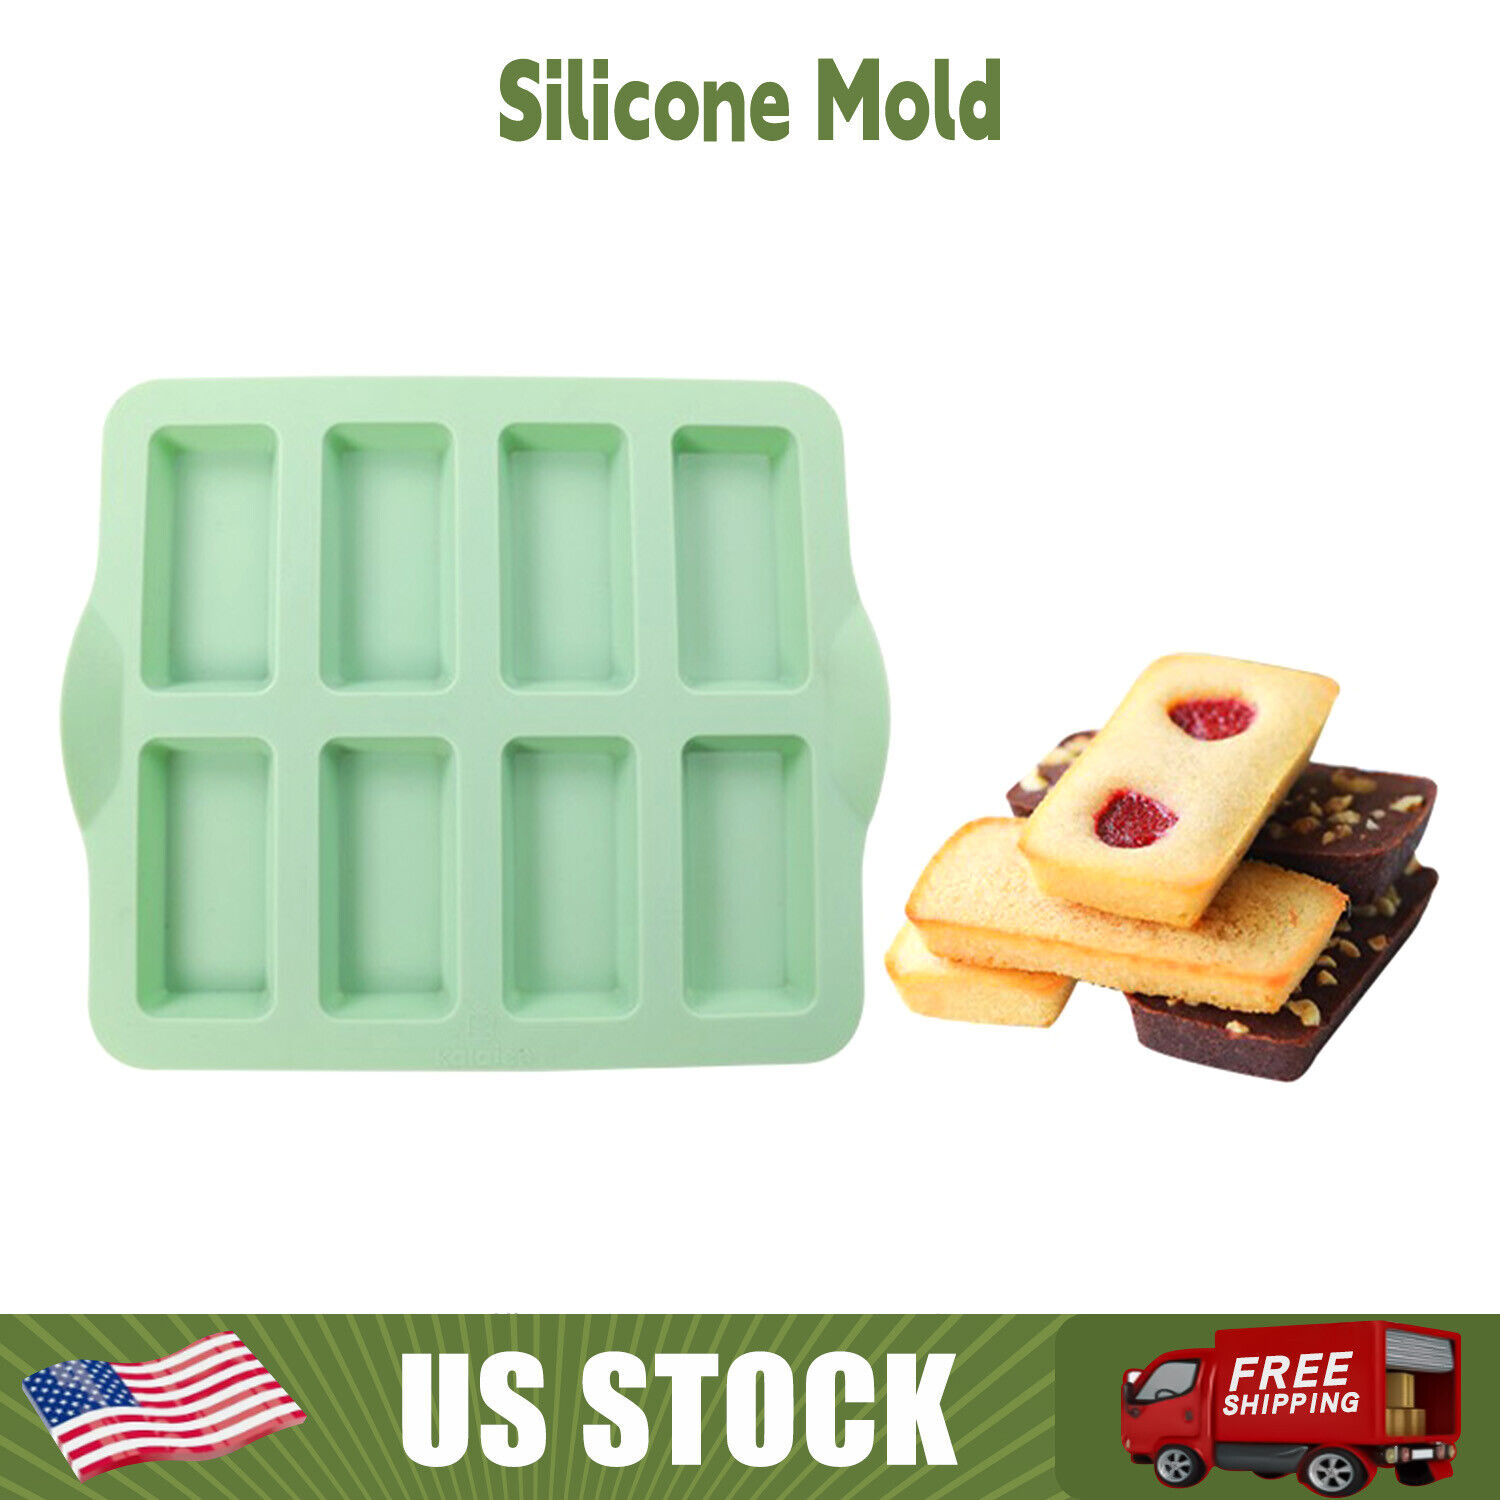 Silicone Mold 8-hole Financier Biscuit Cookie Mousse Chocolate Mold Non-stick